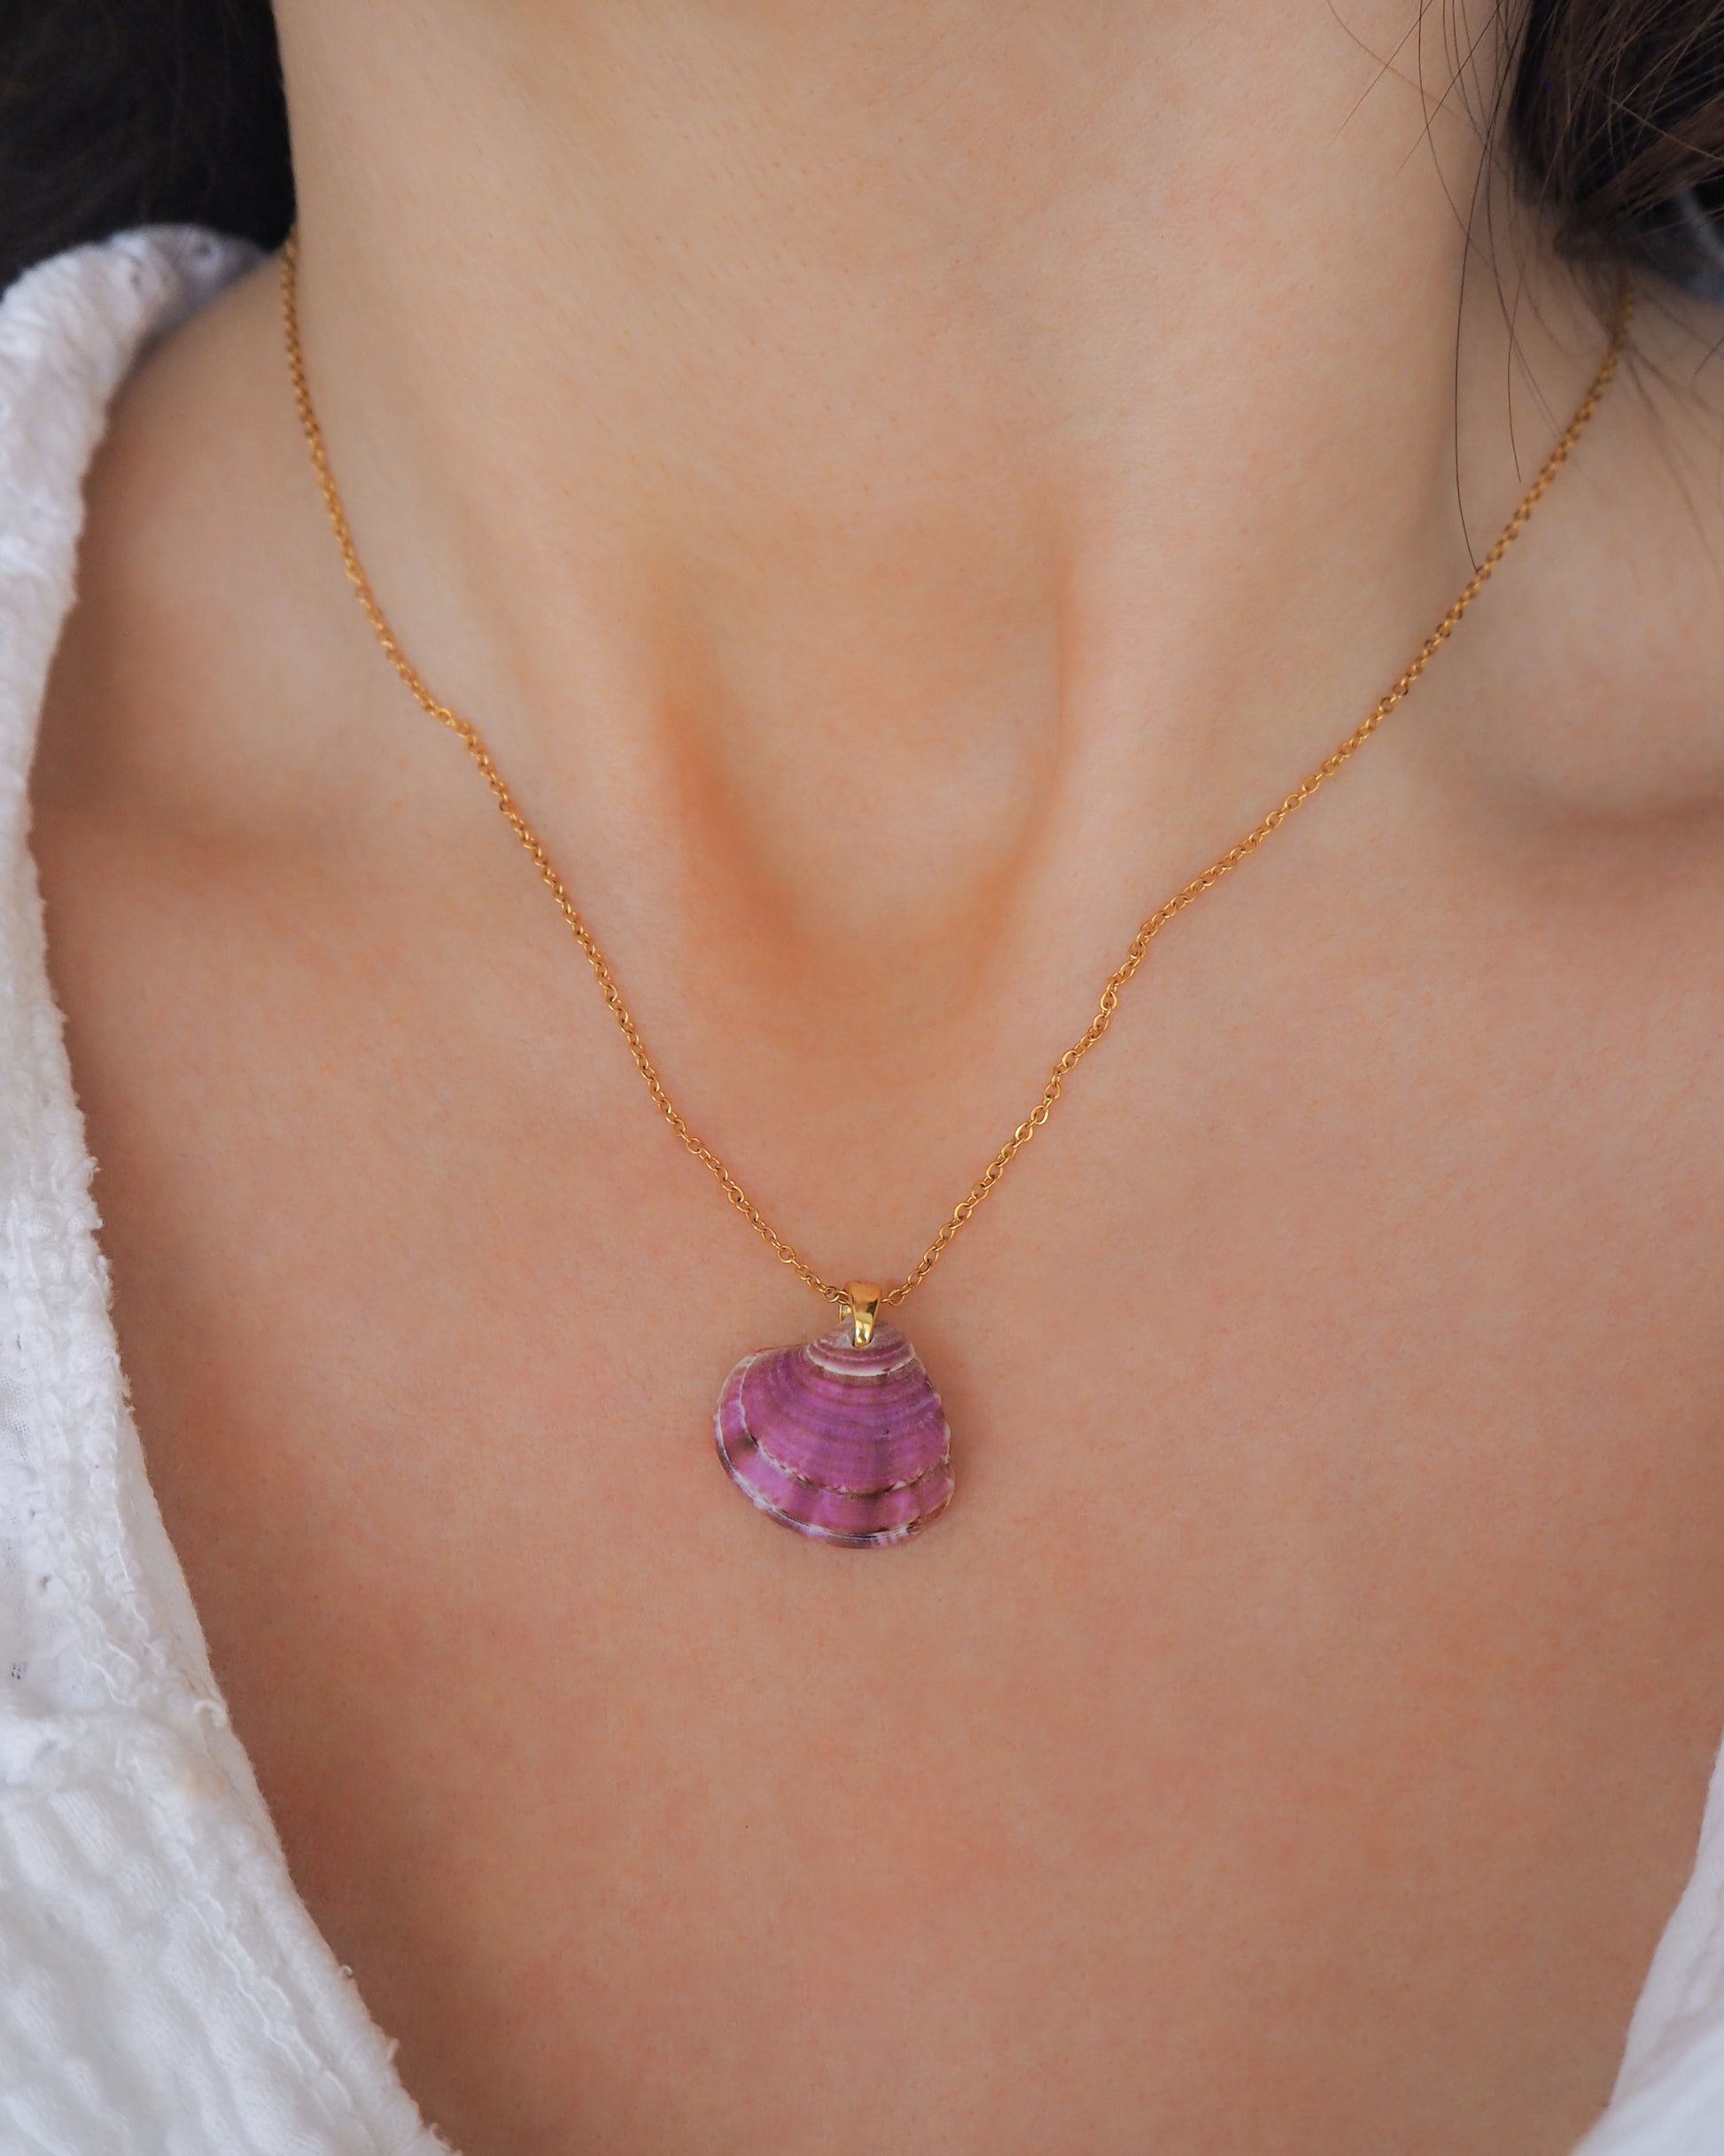 Purple Plum Venus Shell Gold Necklace on Model,, real shell necklace